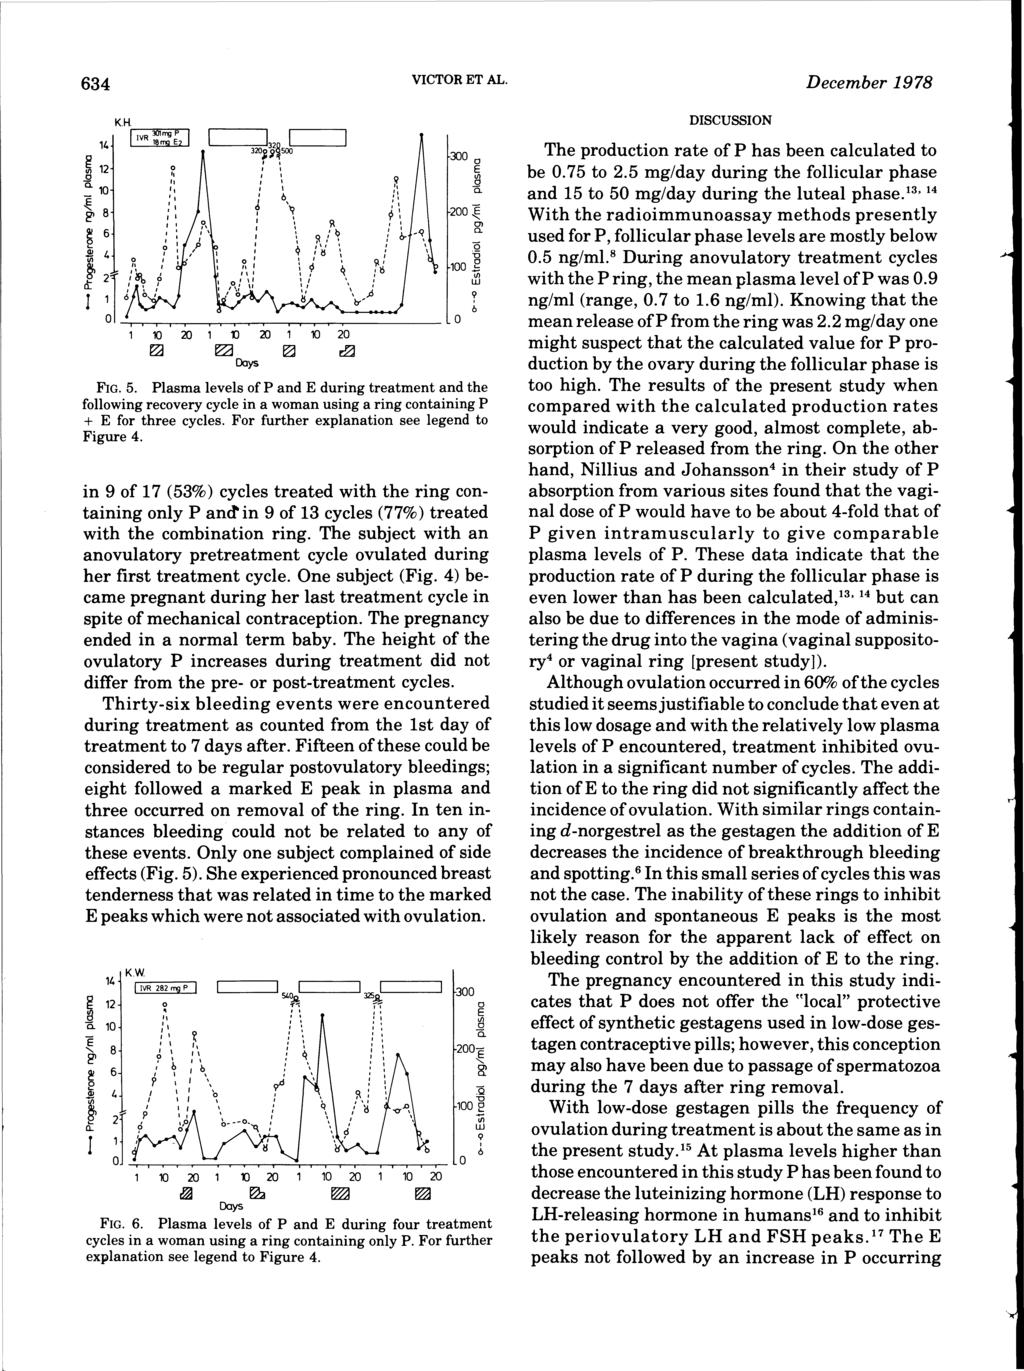 634 VCTOR T AL. December 1978 '---=,2"': 5, _, ' ' 1 211l 2112 &l 3JO o 2 Ol. u 1 _g <fj w? 6 FG. 5. Plasma levels of P and during treatment and the following recovery cycle in a woman using a ring containing P + for three cycles.